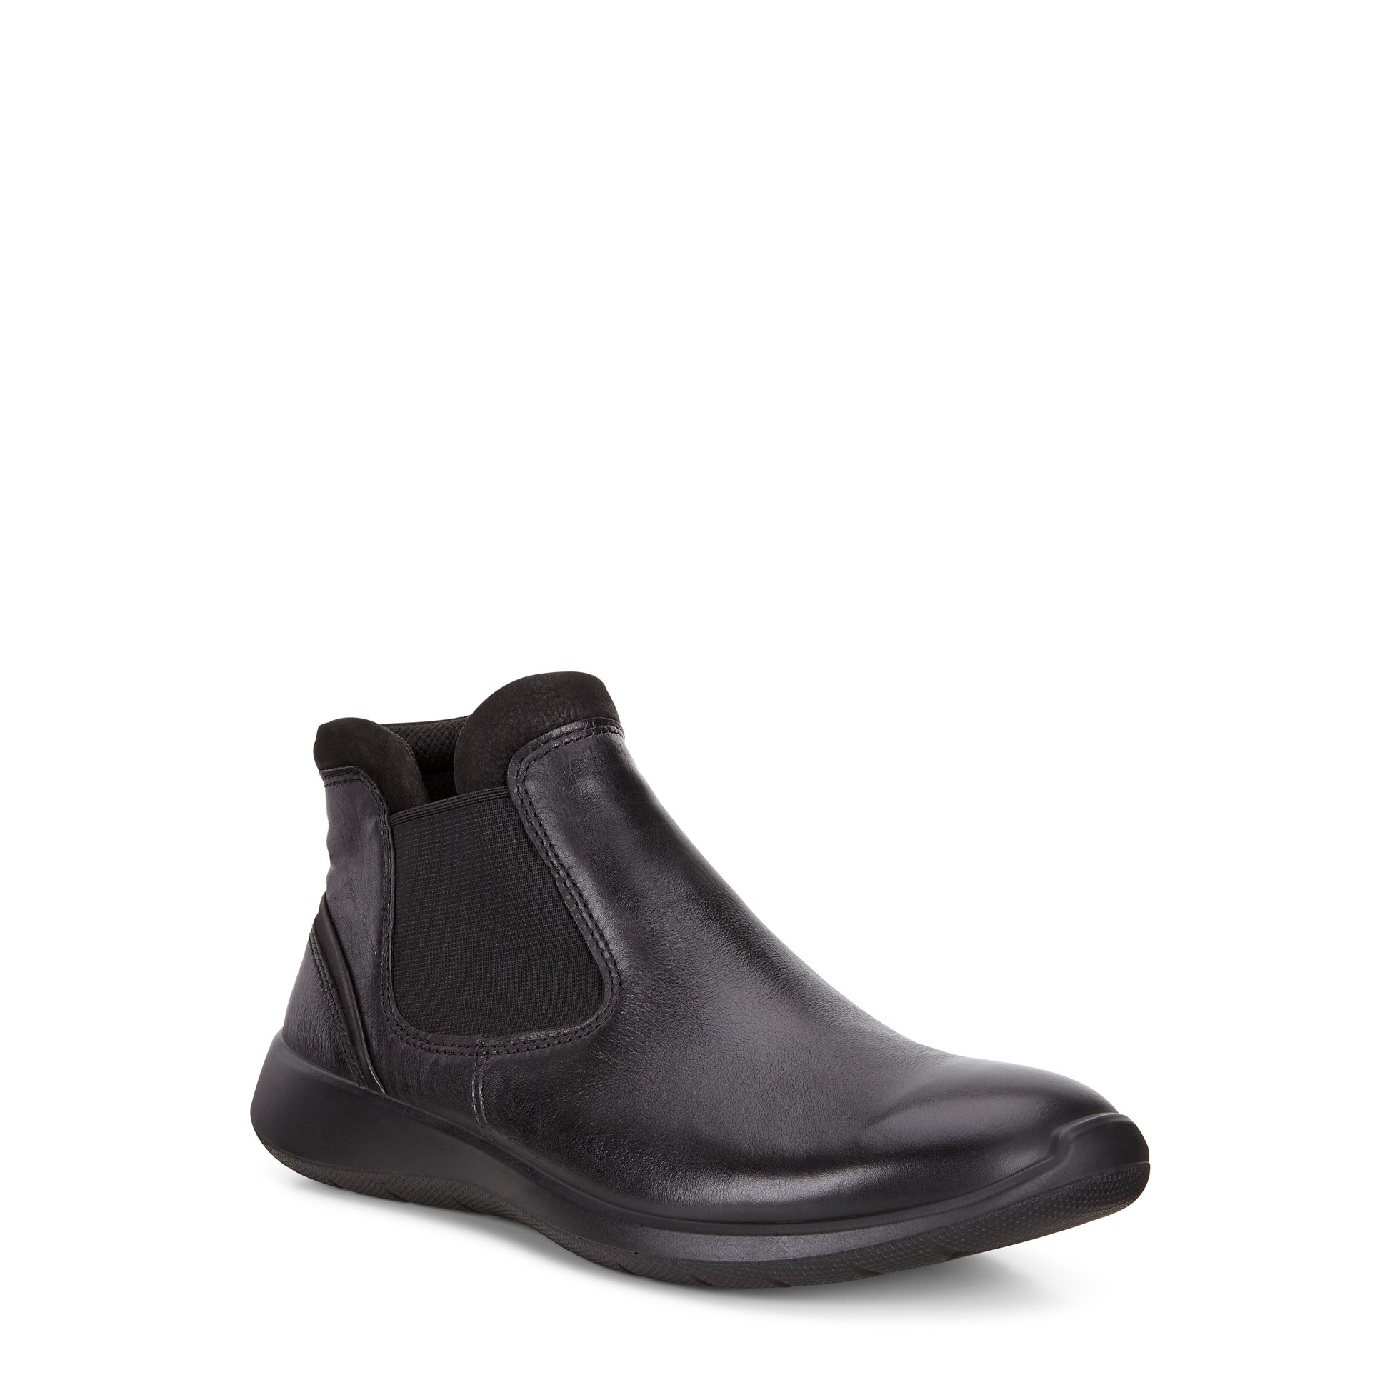 Ecco Ladies Black Pull-On Ankle Boot - County Shoes Dorchester